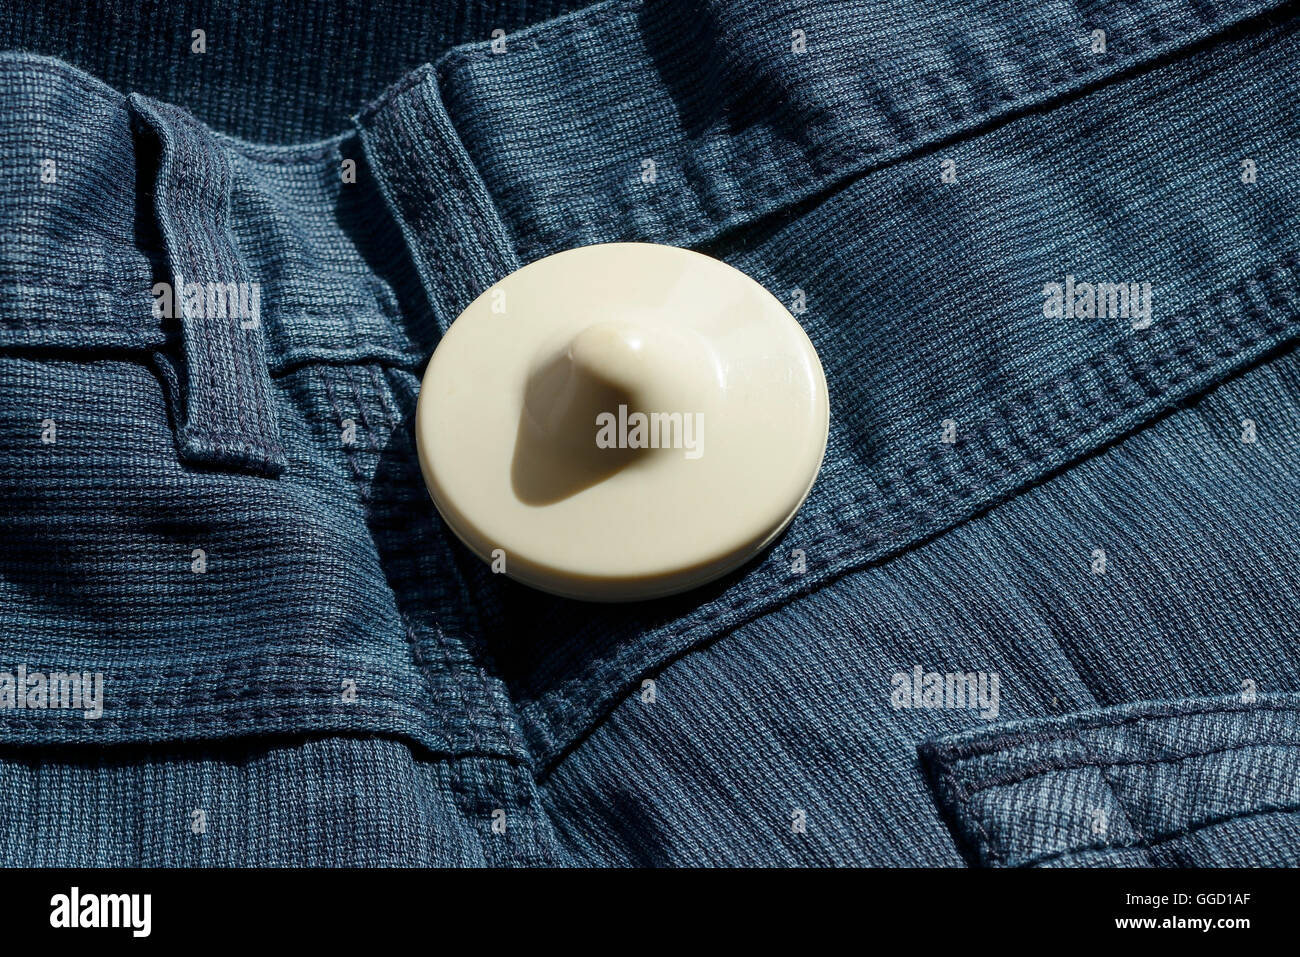 A shop security tag on a pair of trousers Stock Photo